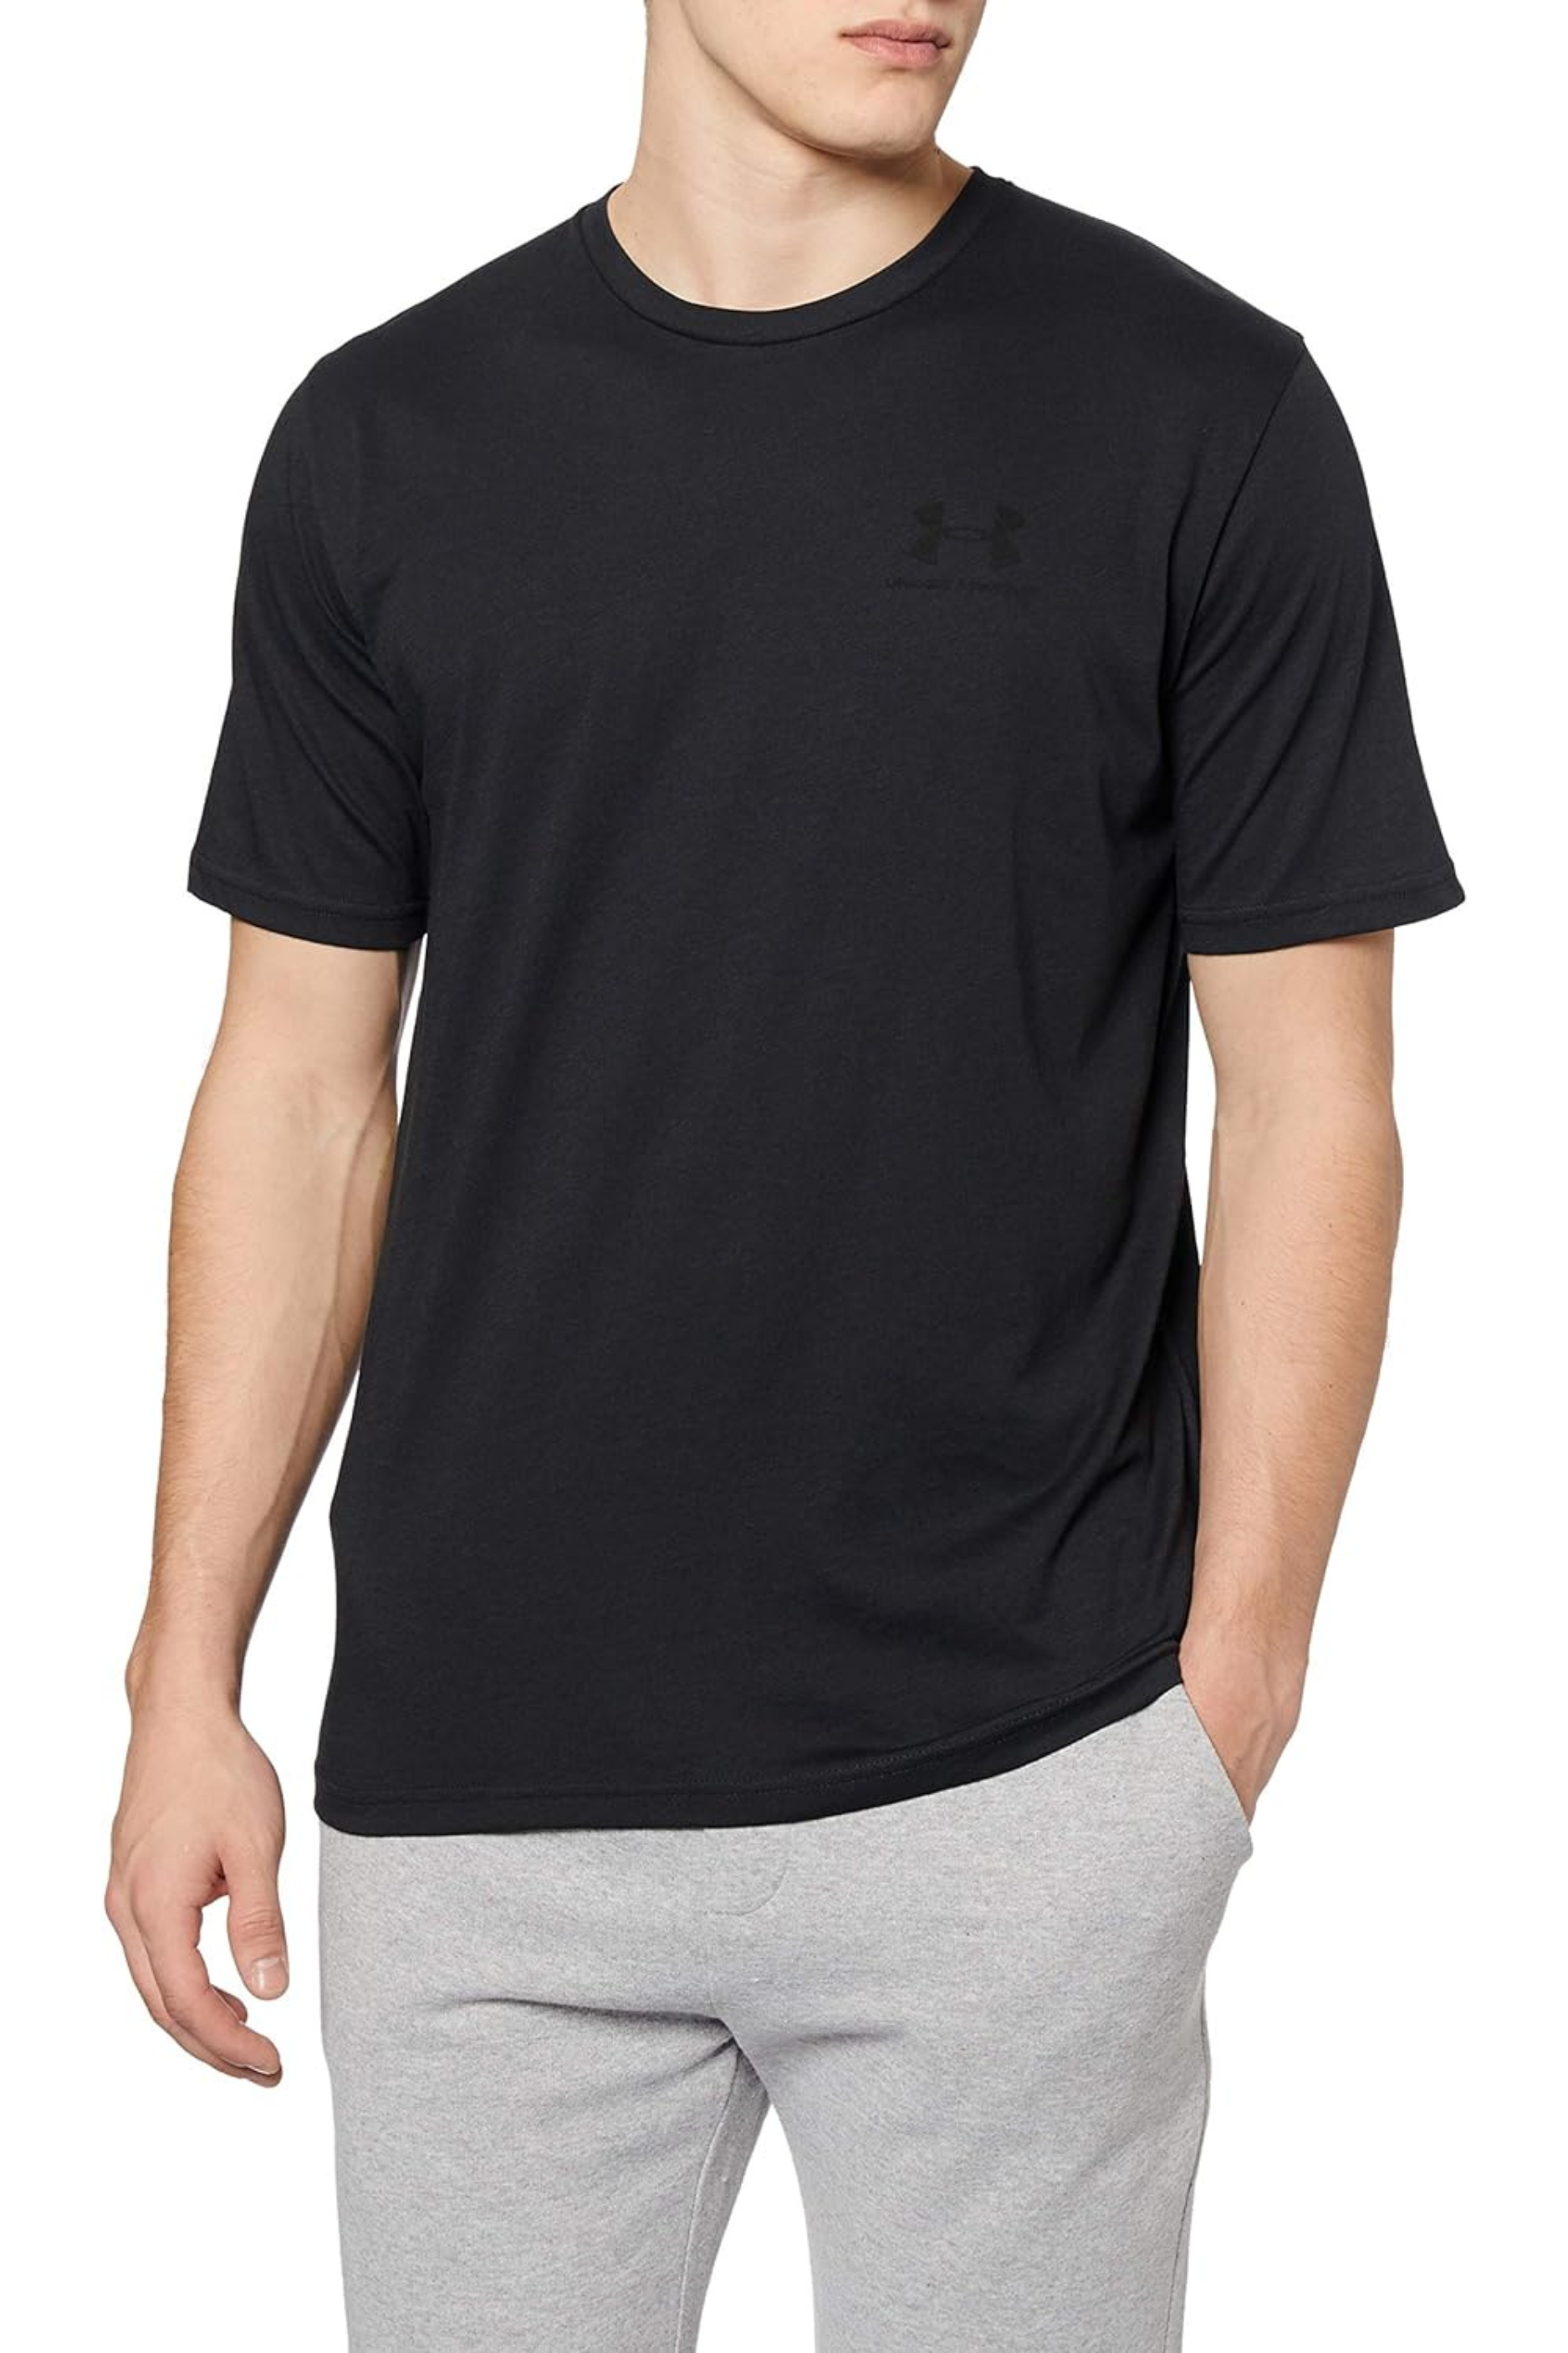 Under Armour Mens Ua M Sportstyle Lc Ss T-Shirt (pack of 1)